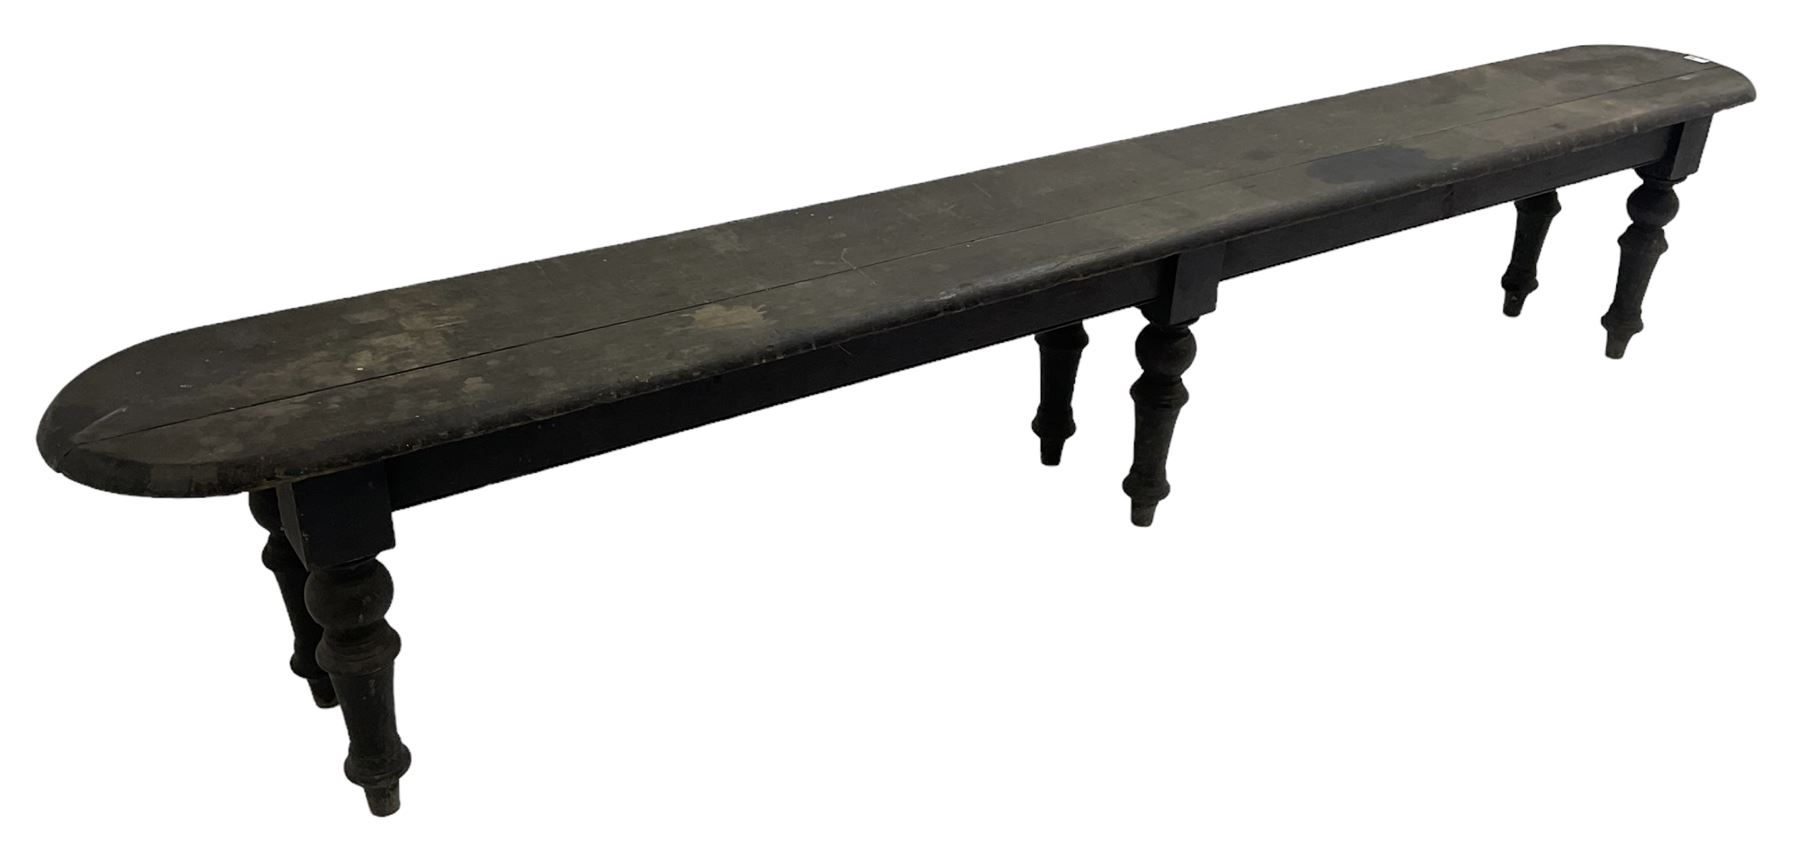 Large 19th century stained oak 9' hall bench - Image 4 of 8